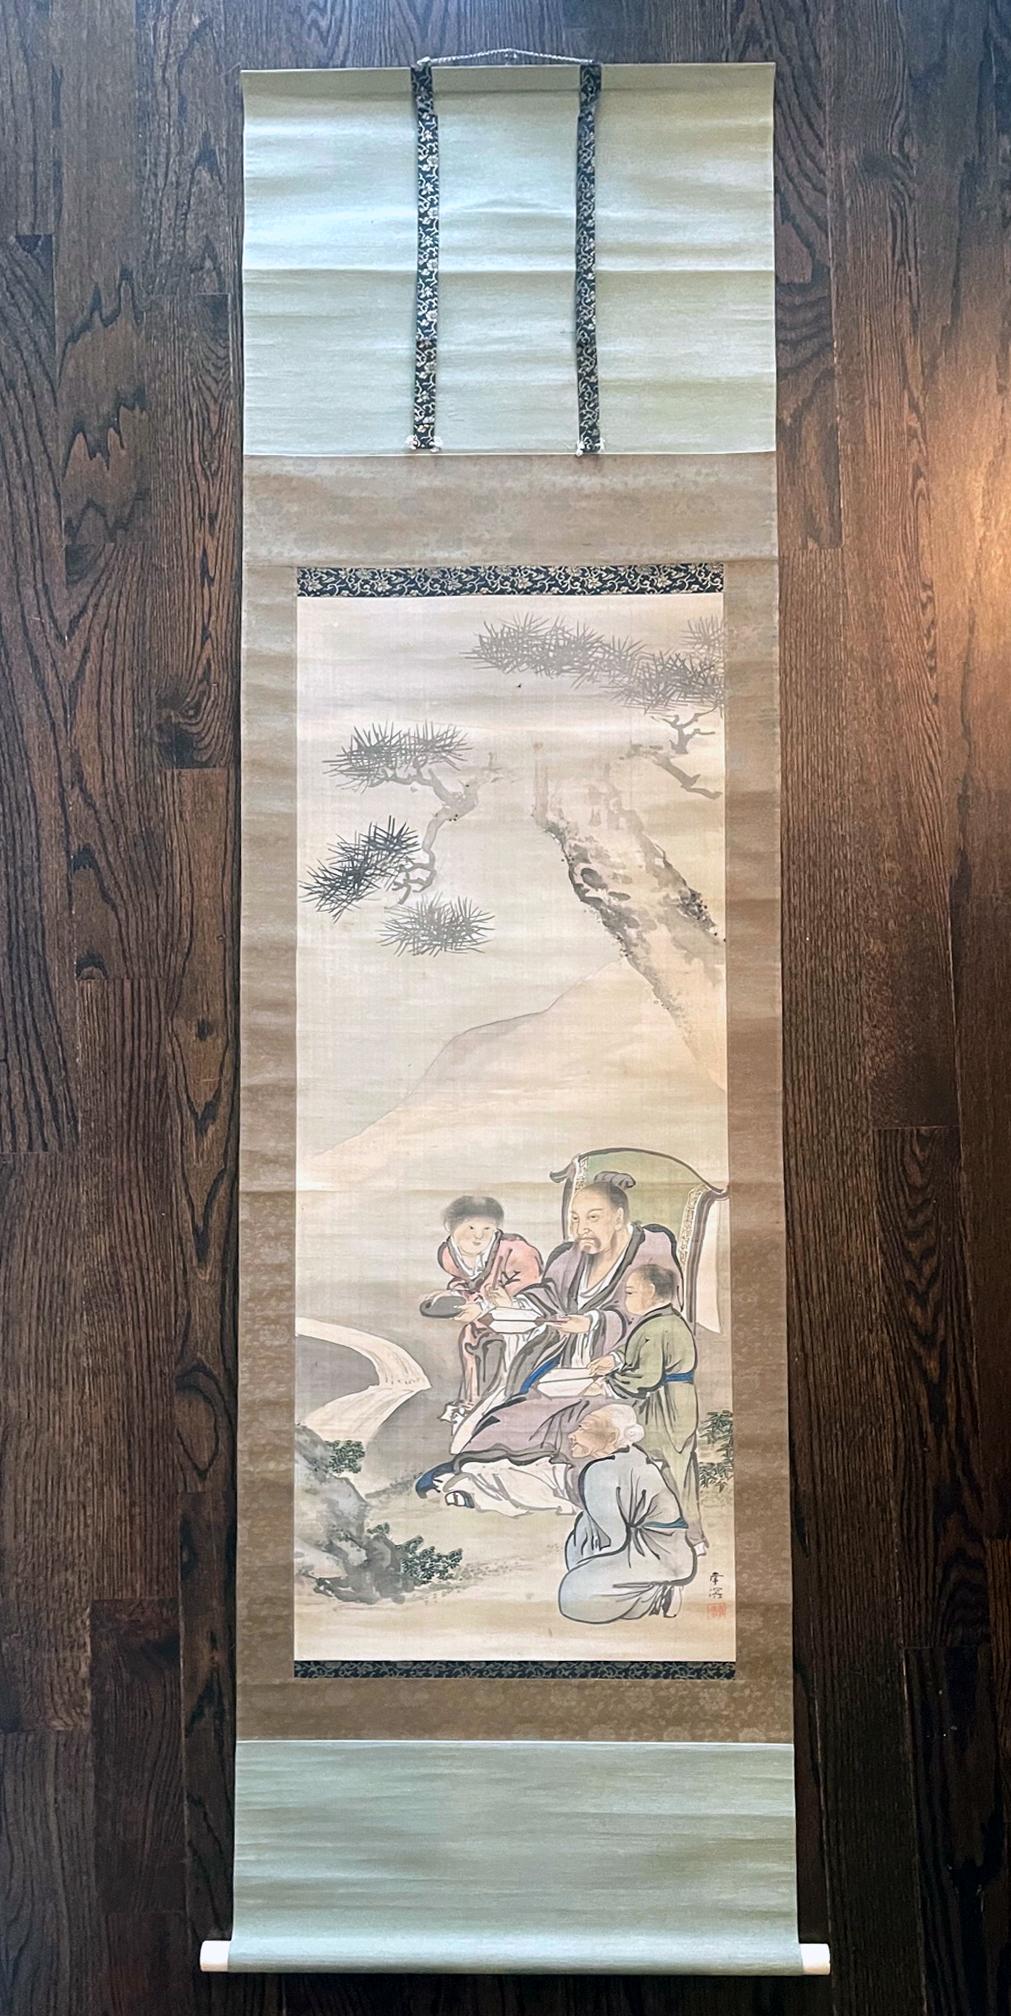 A Japanese hanging silk scroll by late Edo period painter Haruki Nanmei (1795-1878). The gouache painting was in the tradition of Kano school and depicts an old scholar dressed in long flowing robe, sitting on a Chinese style chair under a towering